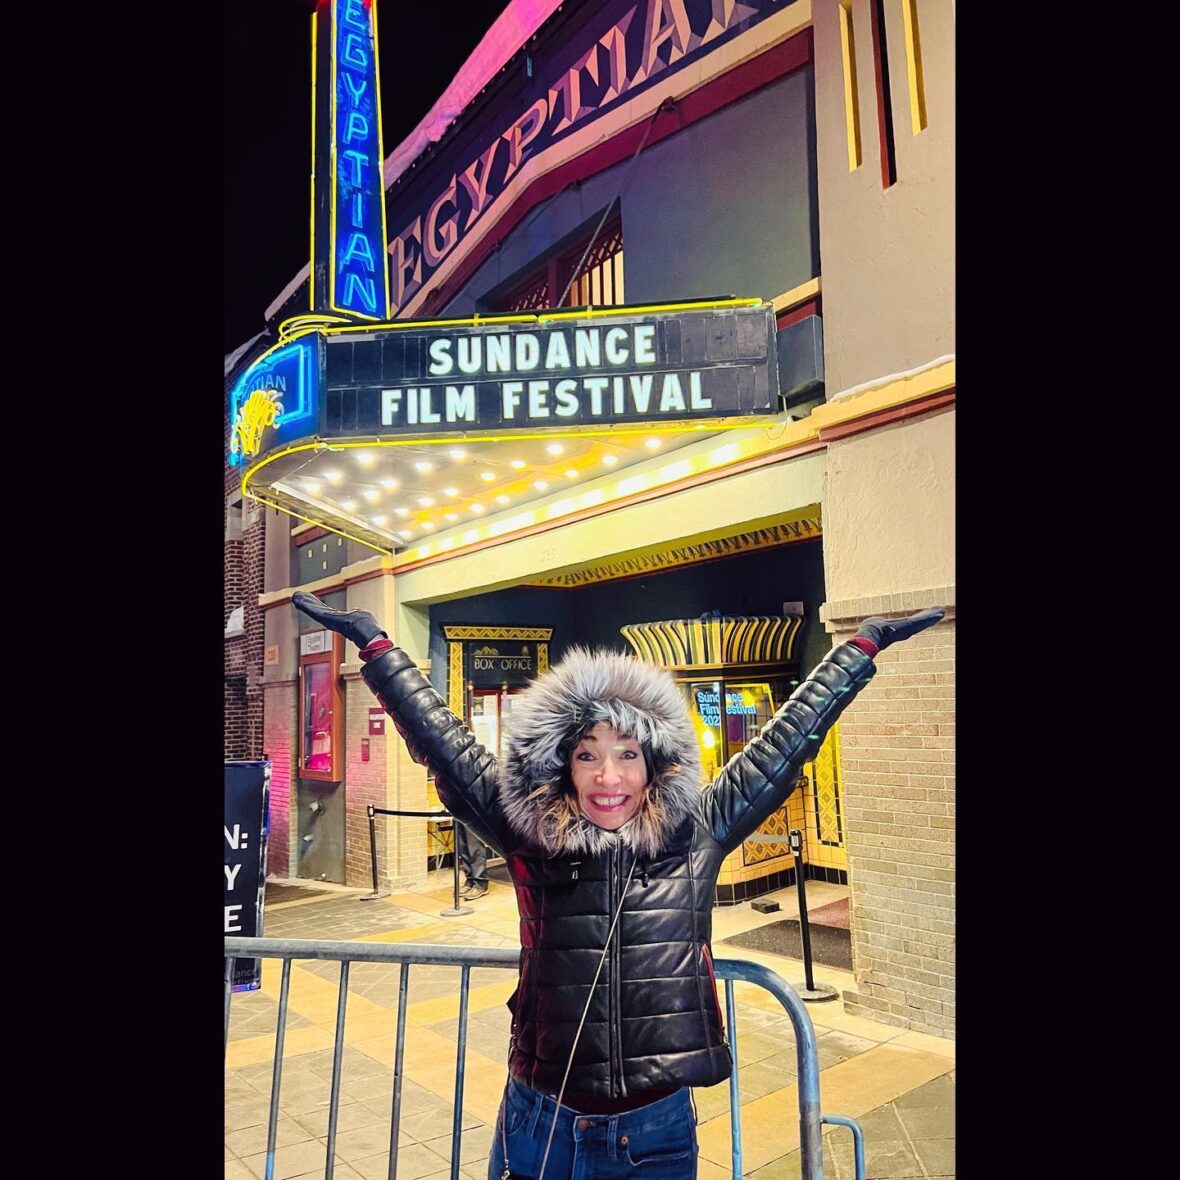 You are currently viewing Oh snap! #Sundance is heating up! (It’s 7 degrees here.) 🥶 #photoby @jamiejohnsonphotography #sundancefilmfestival #parkcity